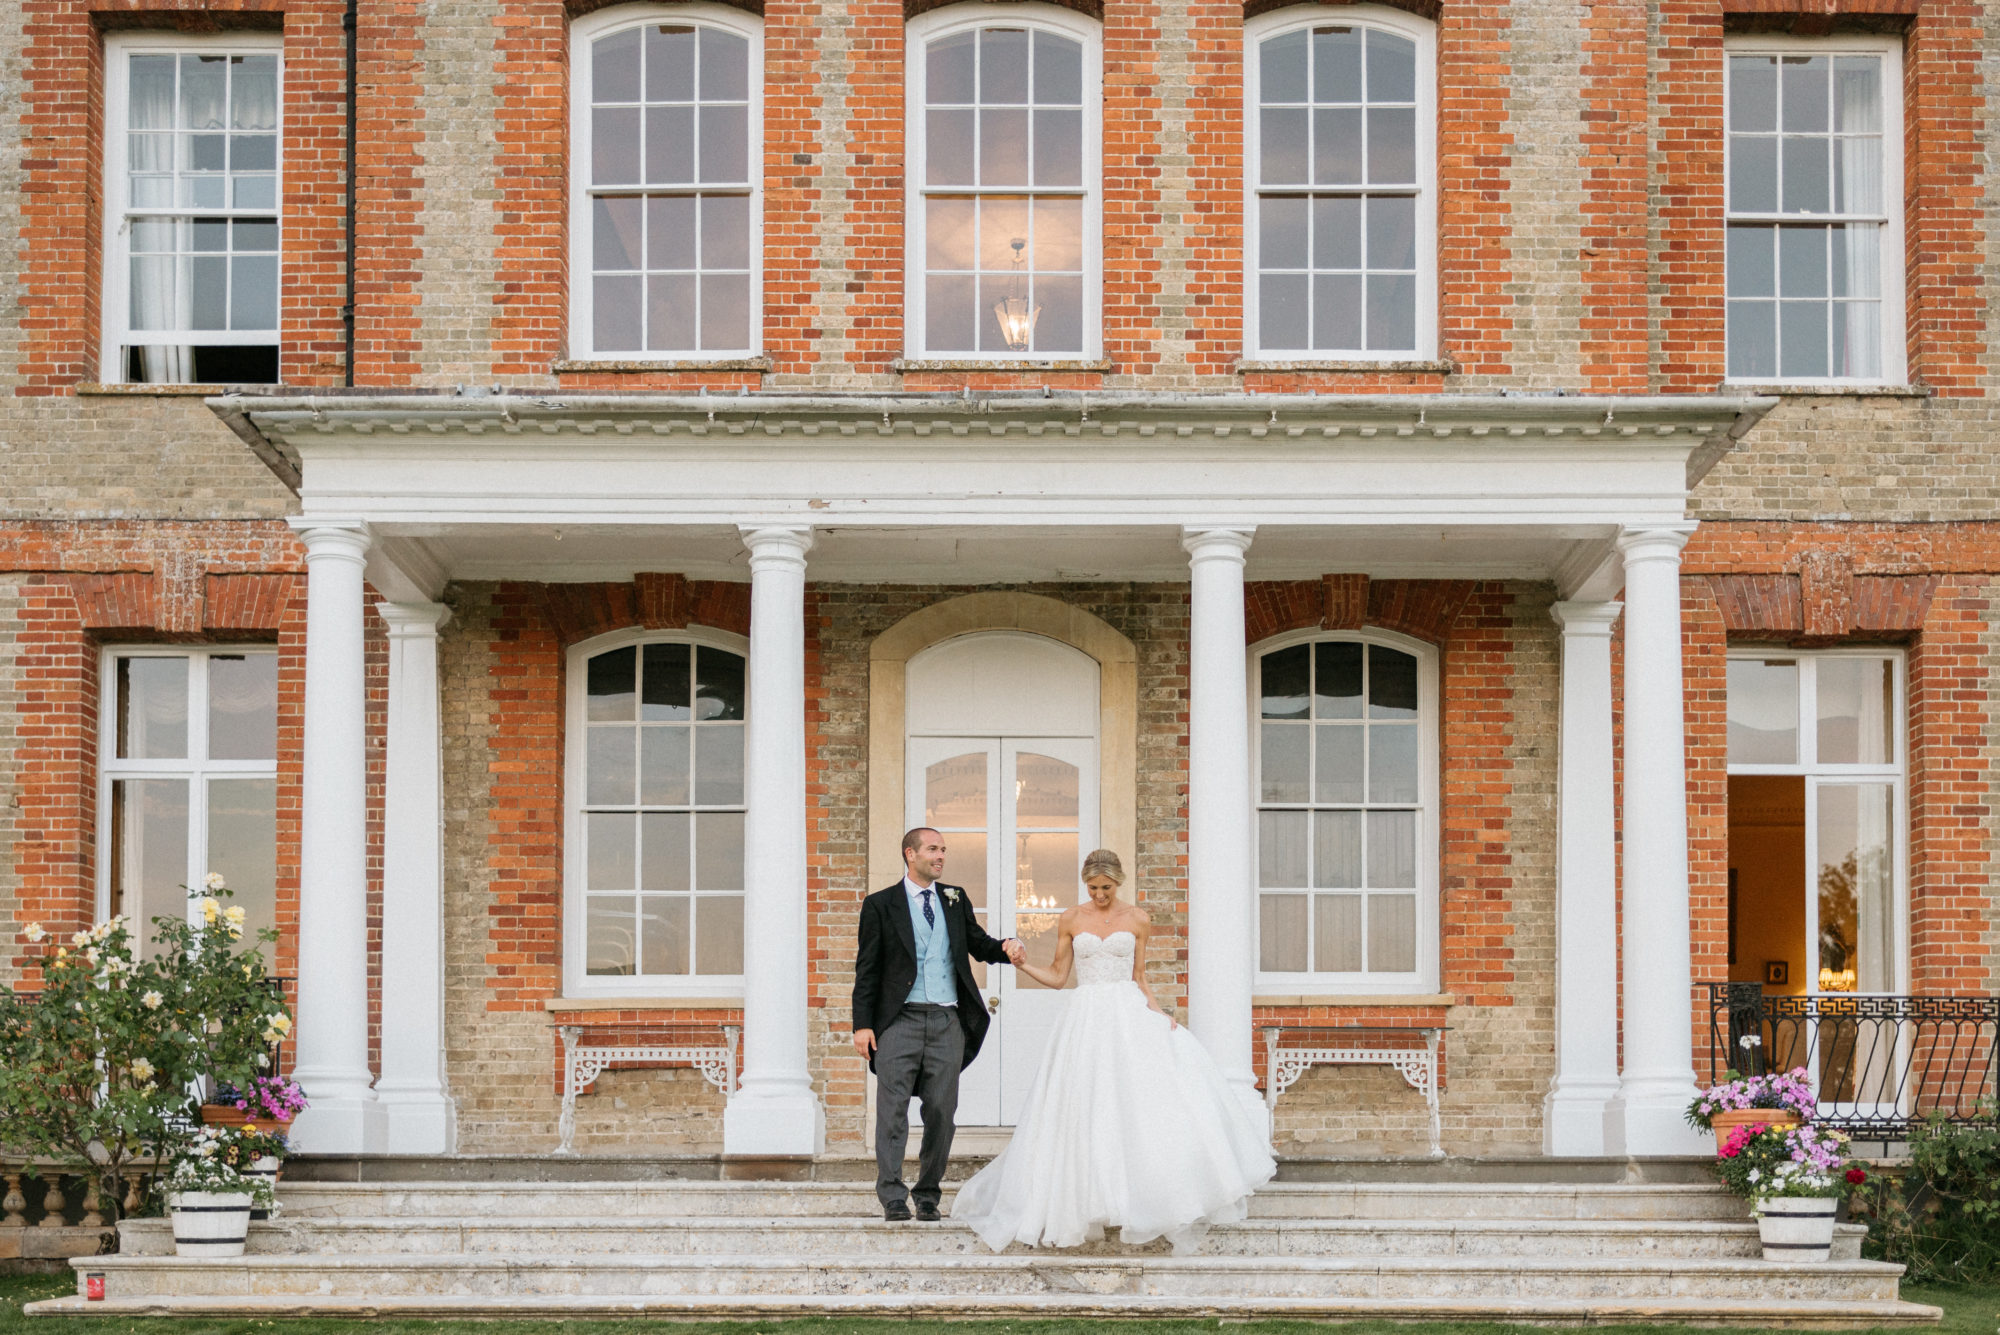 Manor House wedding - Photography by Bea